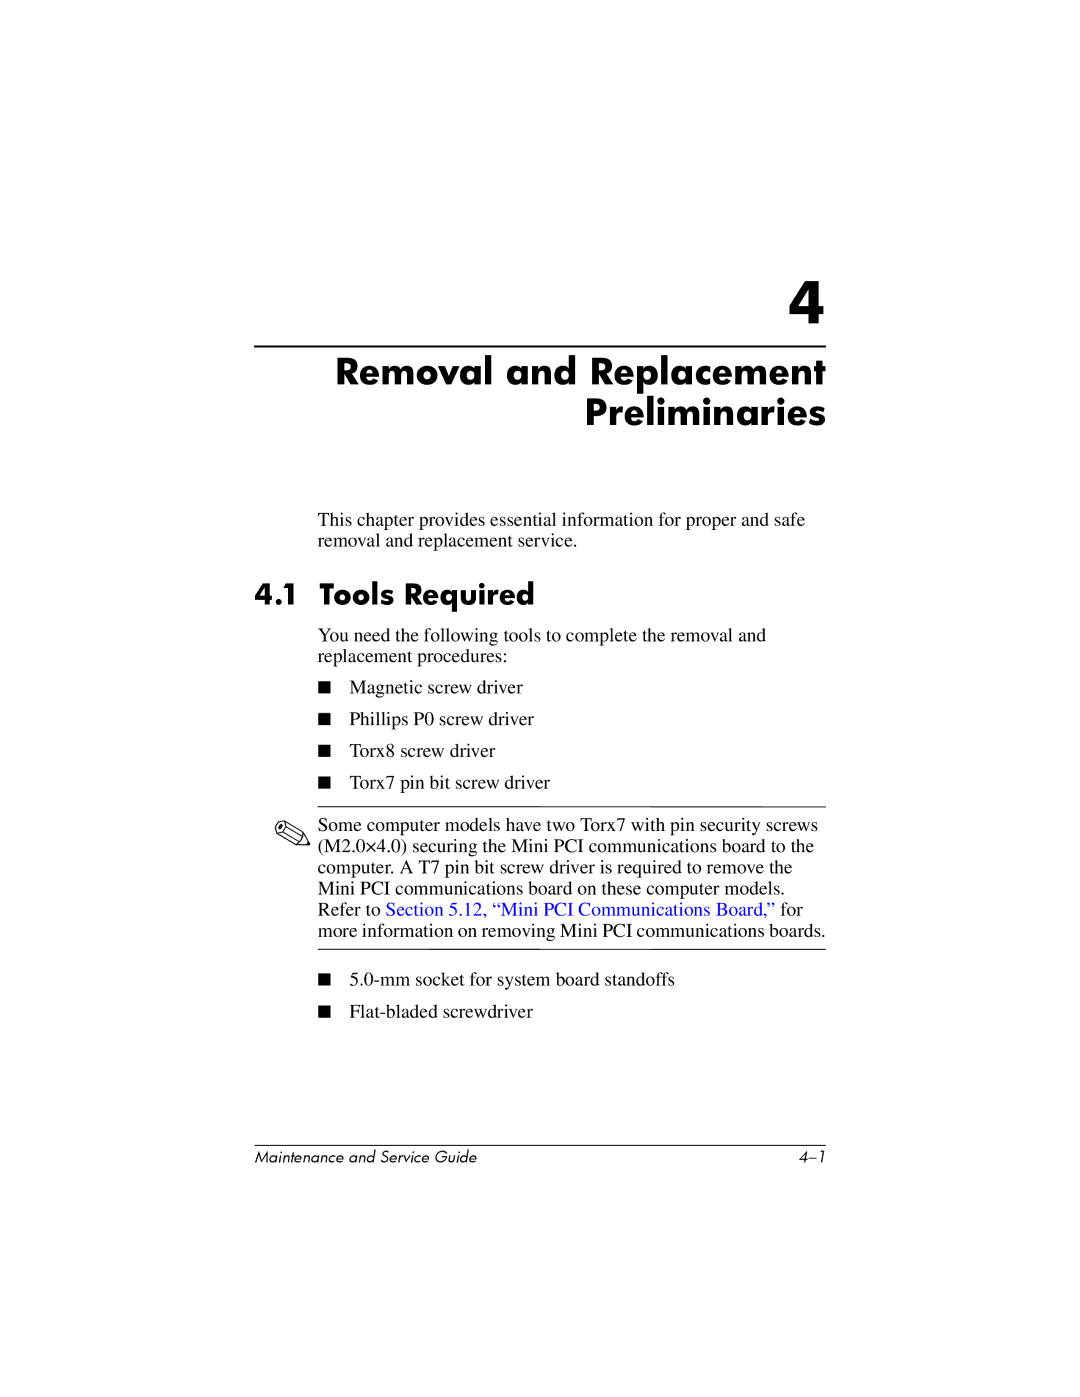 HP nw8000 manual Removal and Replacement Preliminaries, Tools Required 